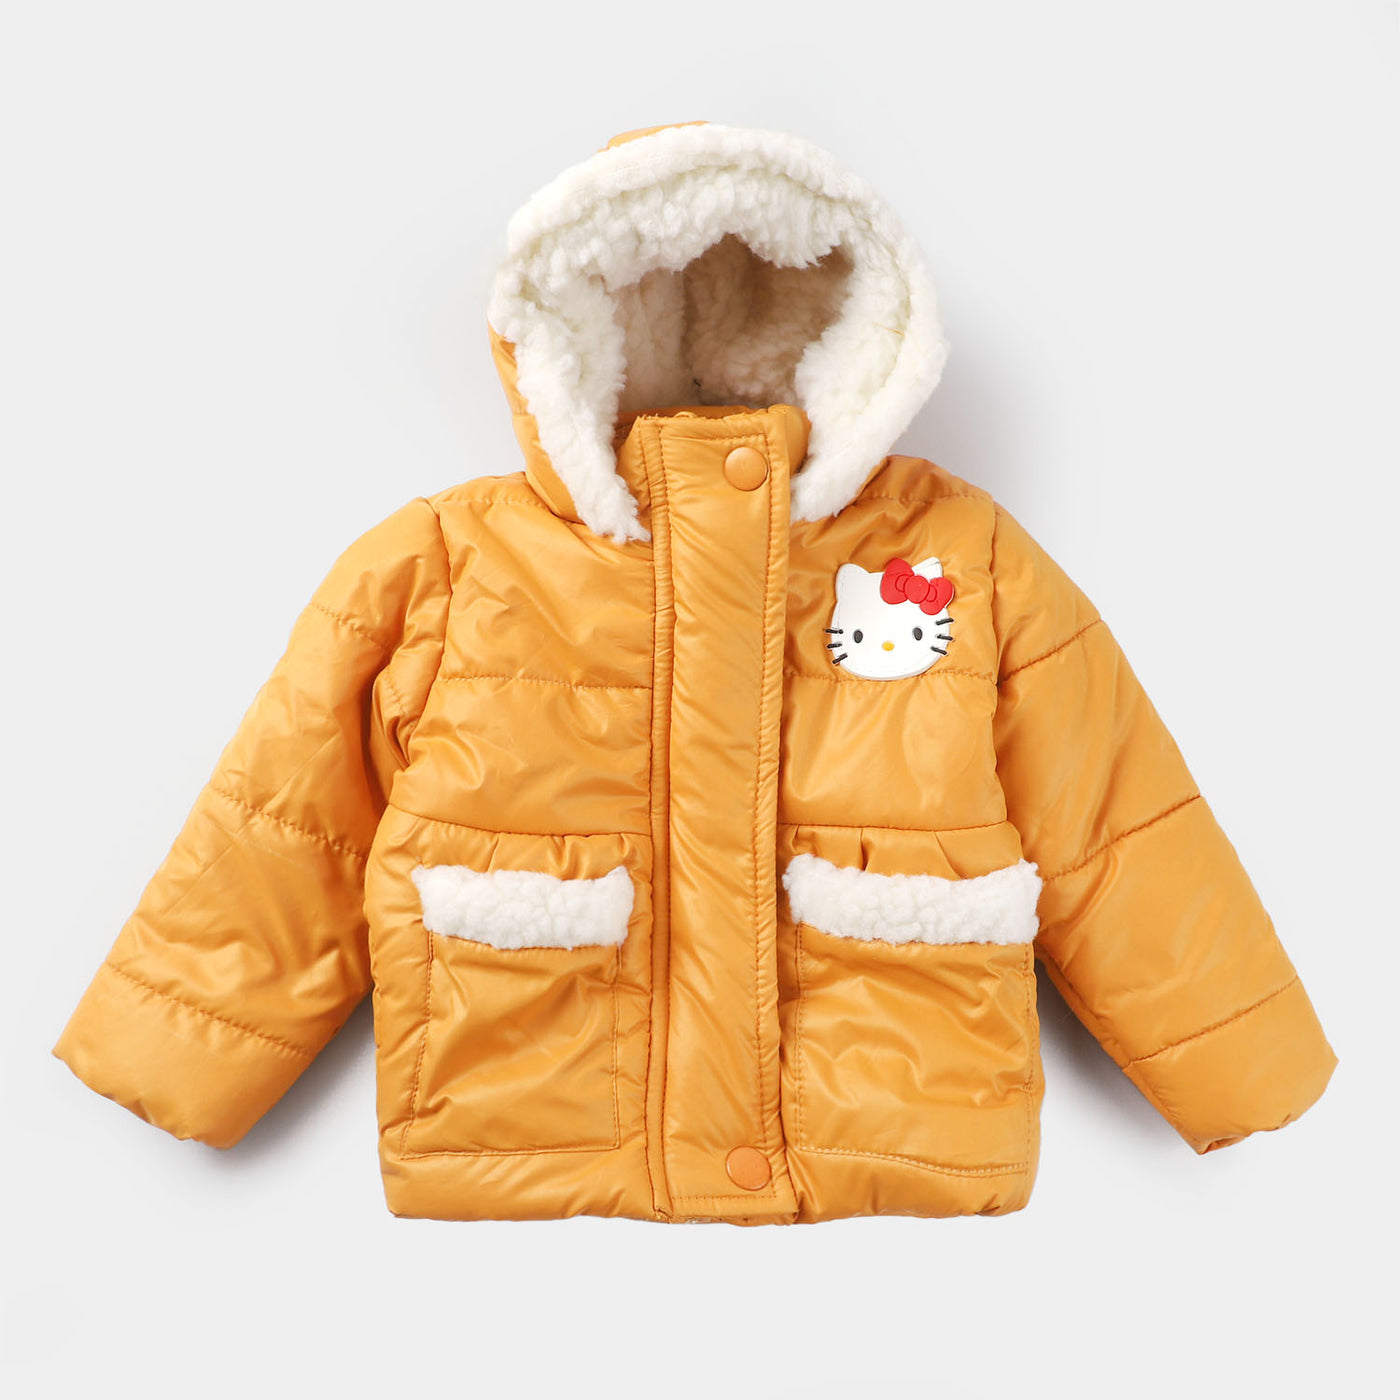 Infant Mix taffeta Girls Quilted Jacket Character - Citrus